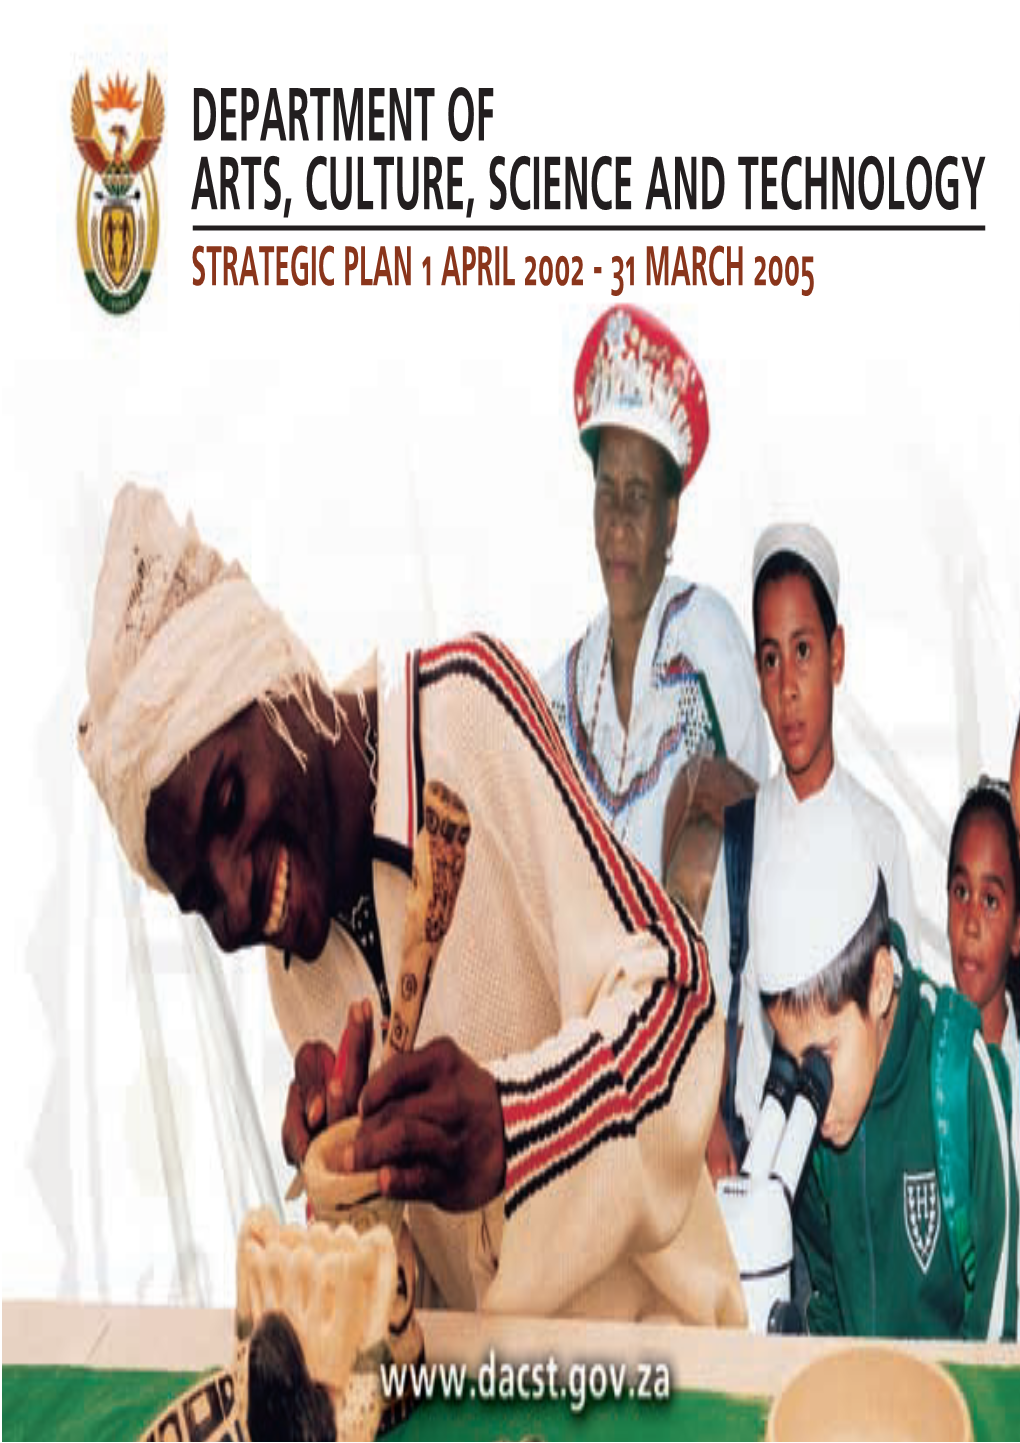 Department of Arts, Culture, Science and Technology Strategic Plan 1 April 2002 - 31 March 2005